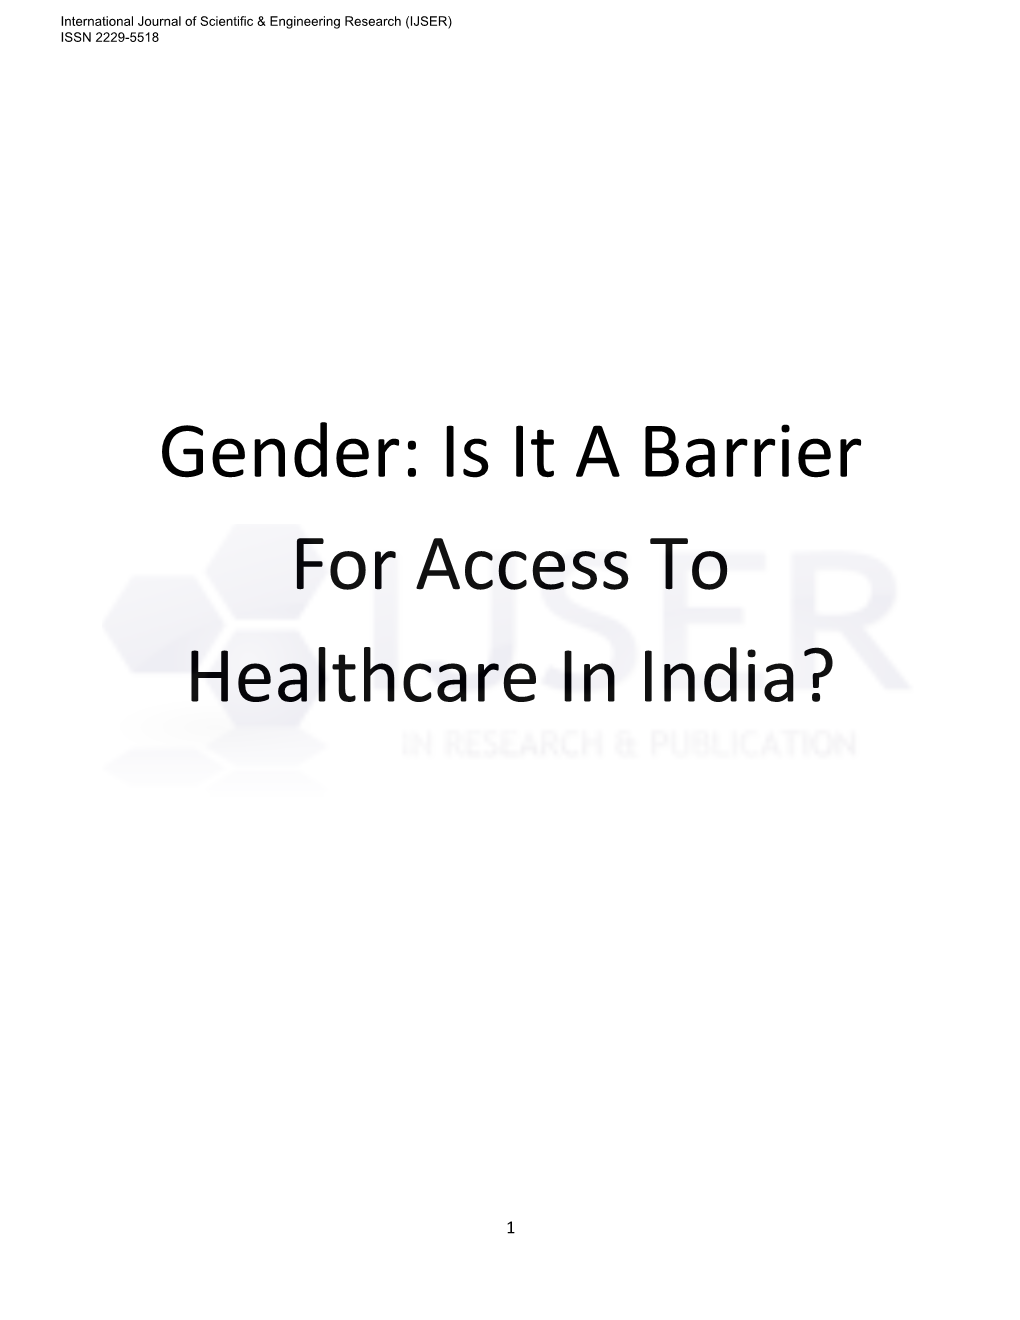 Gender: Is It a Barrier for Access to Health Care in India?